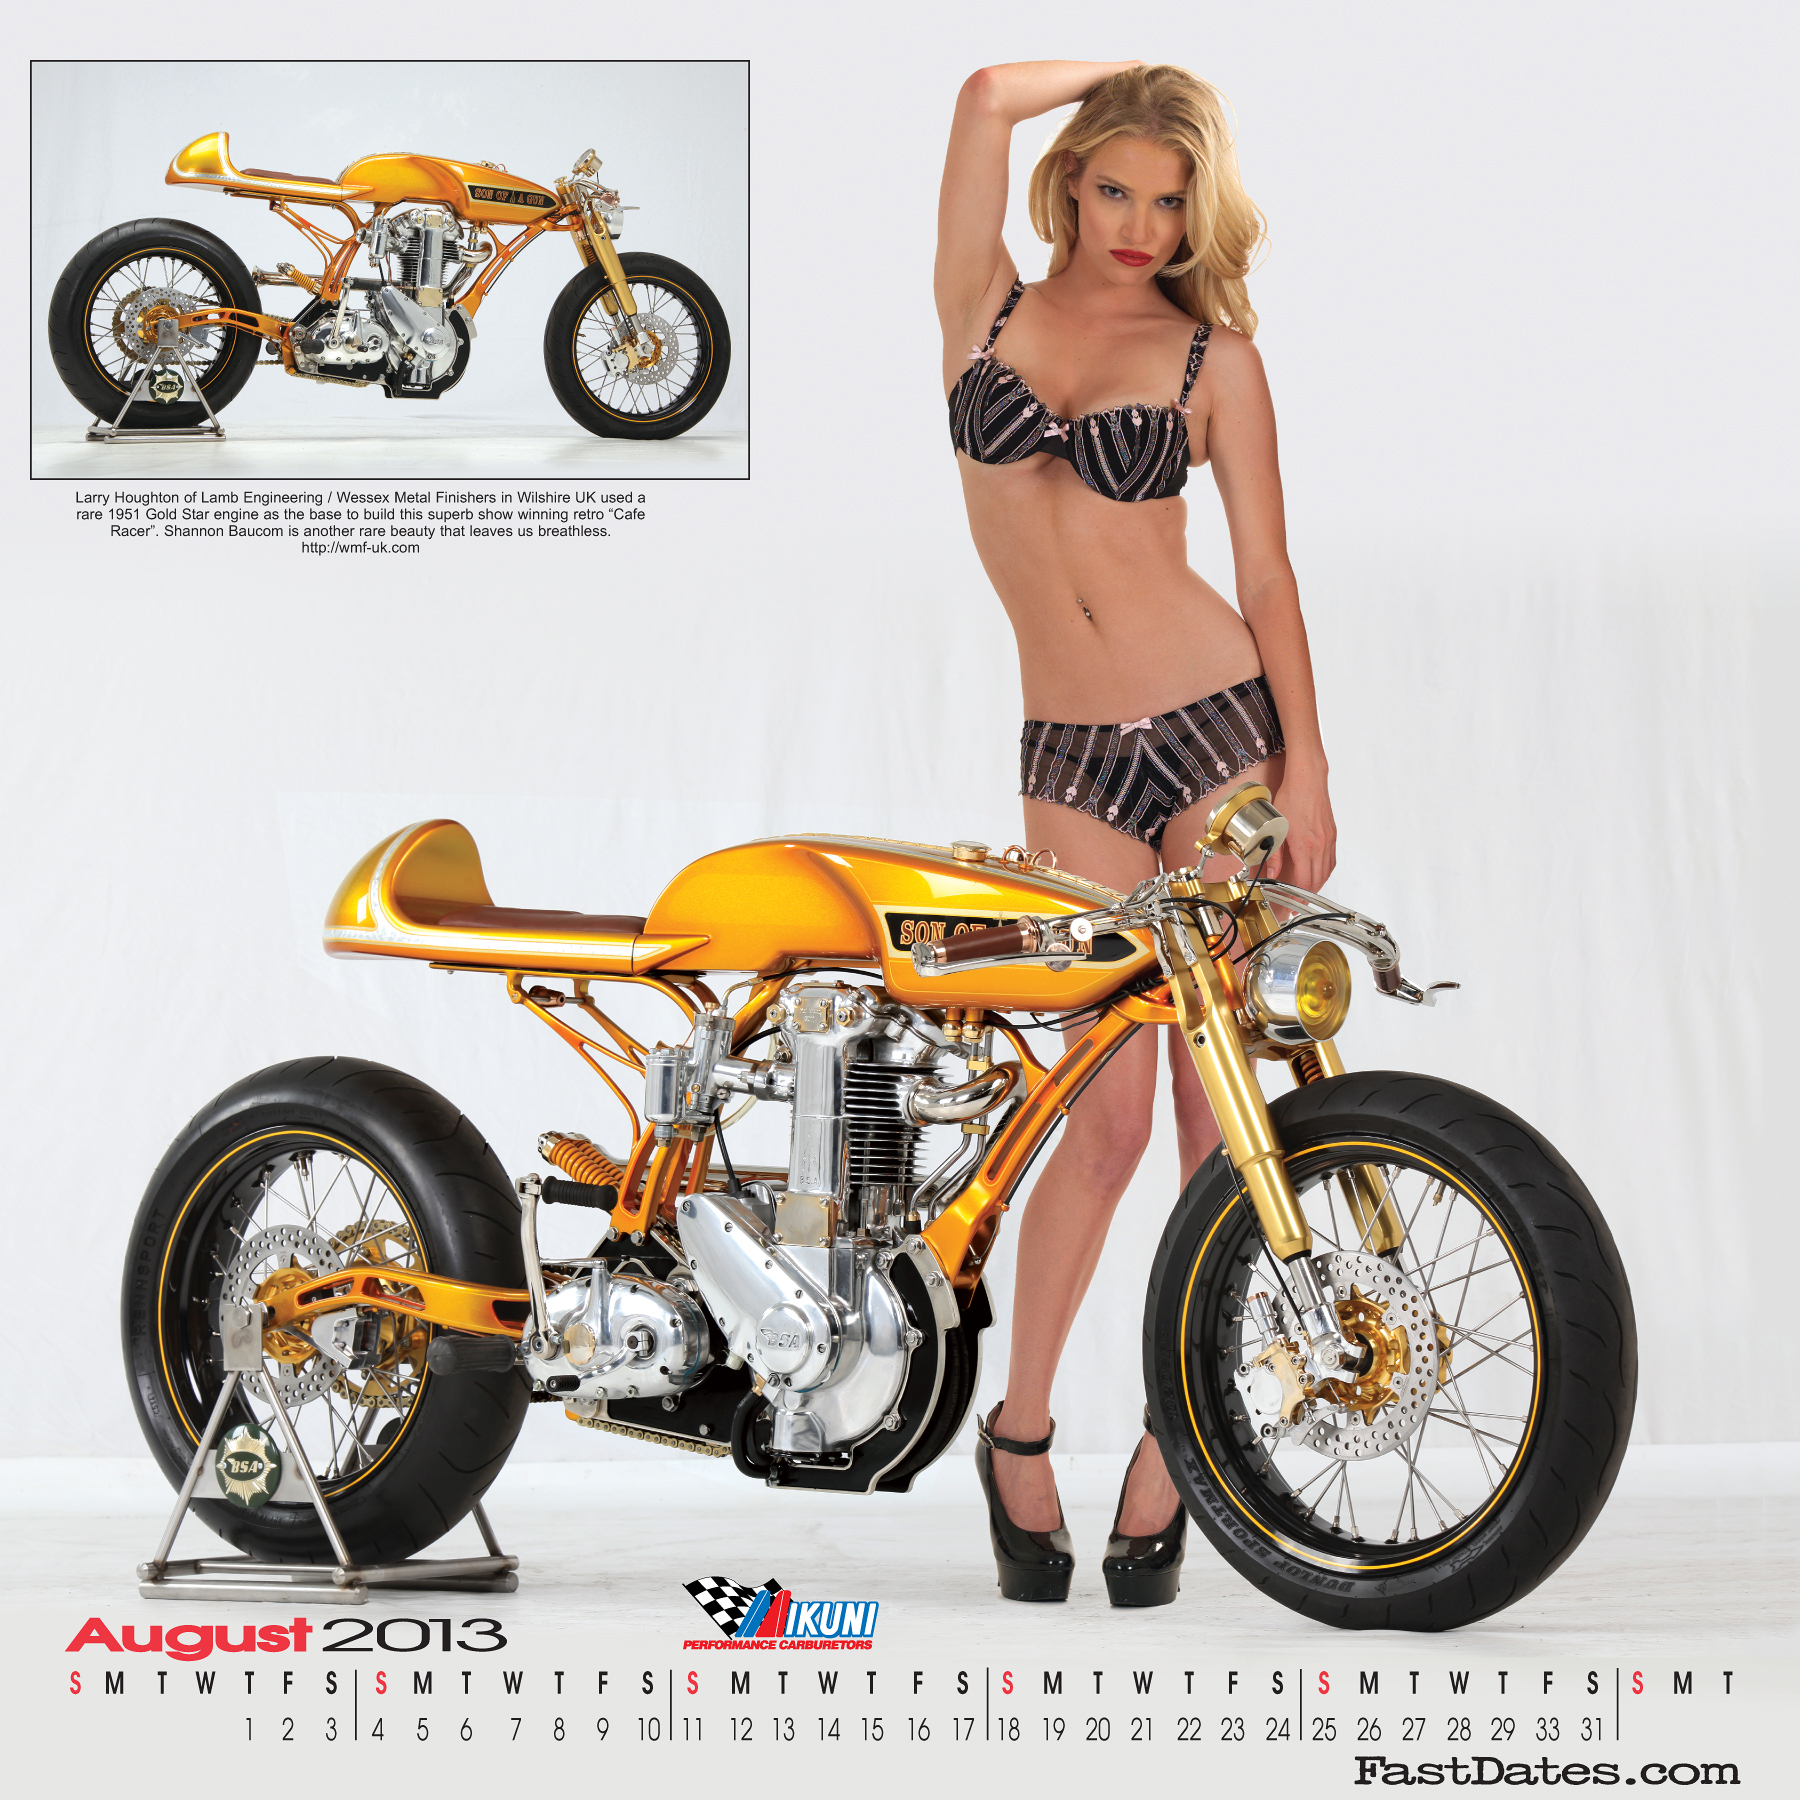 FastDates.com Motorcycle and PinUp Model Wall Calendars, Books